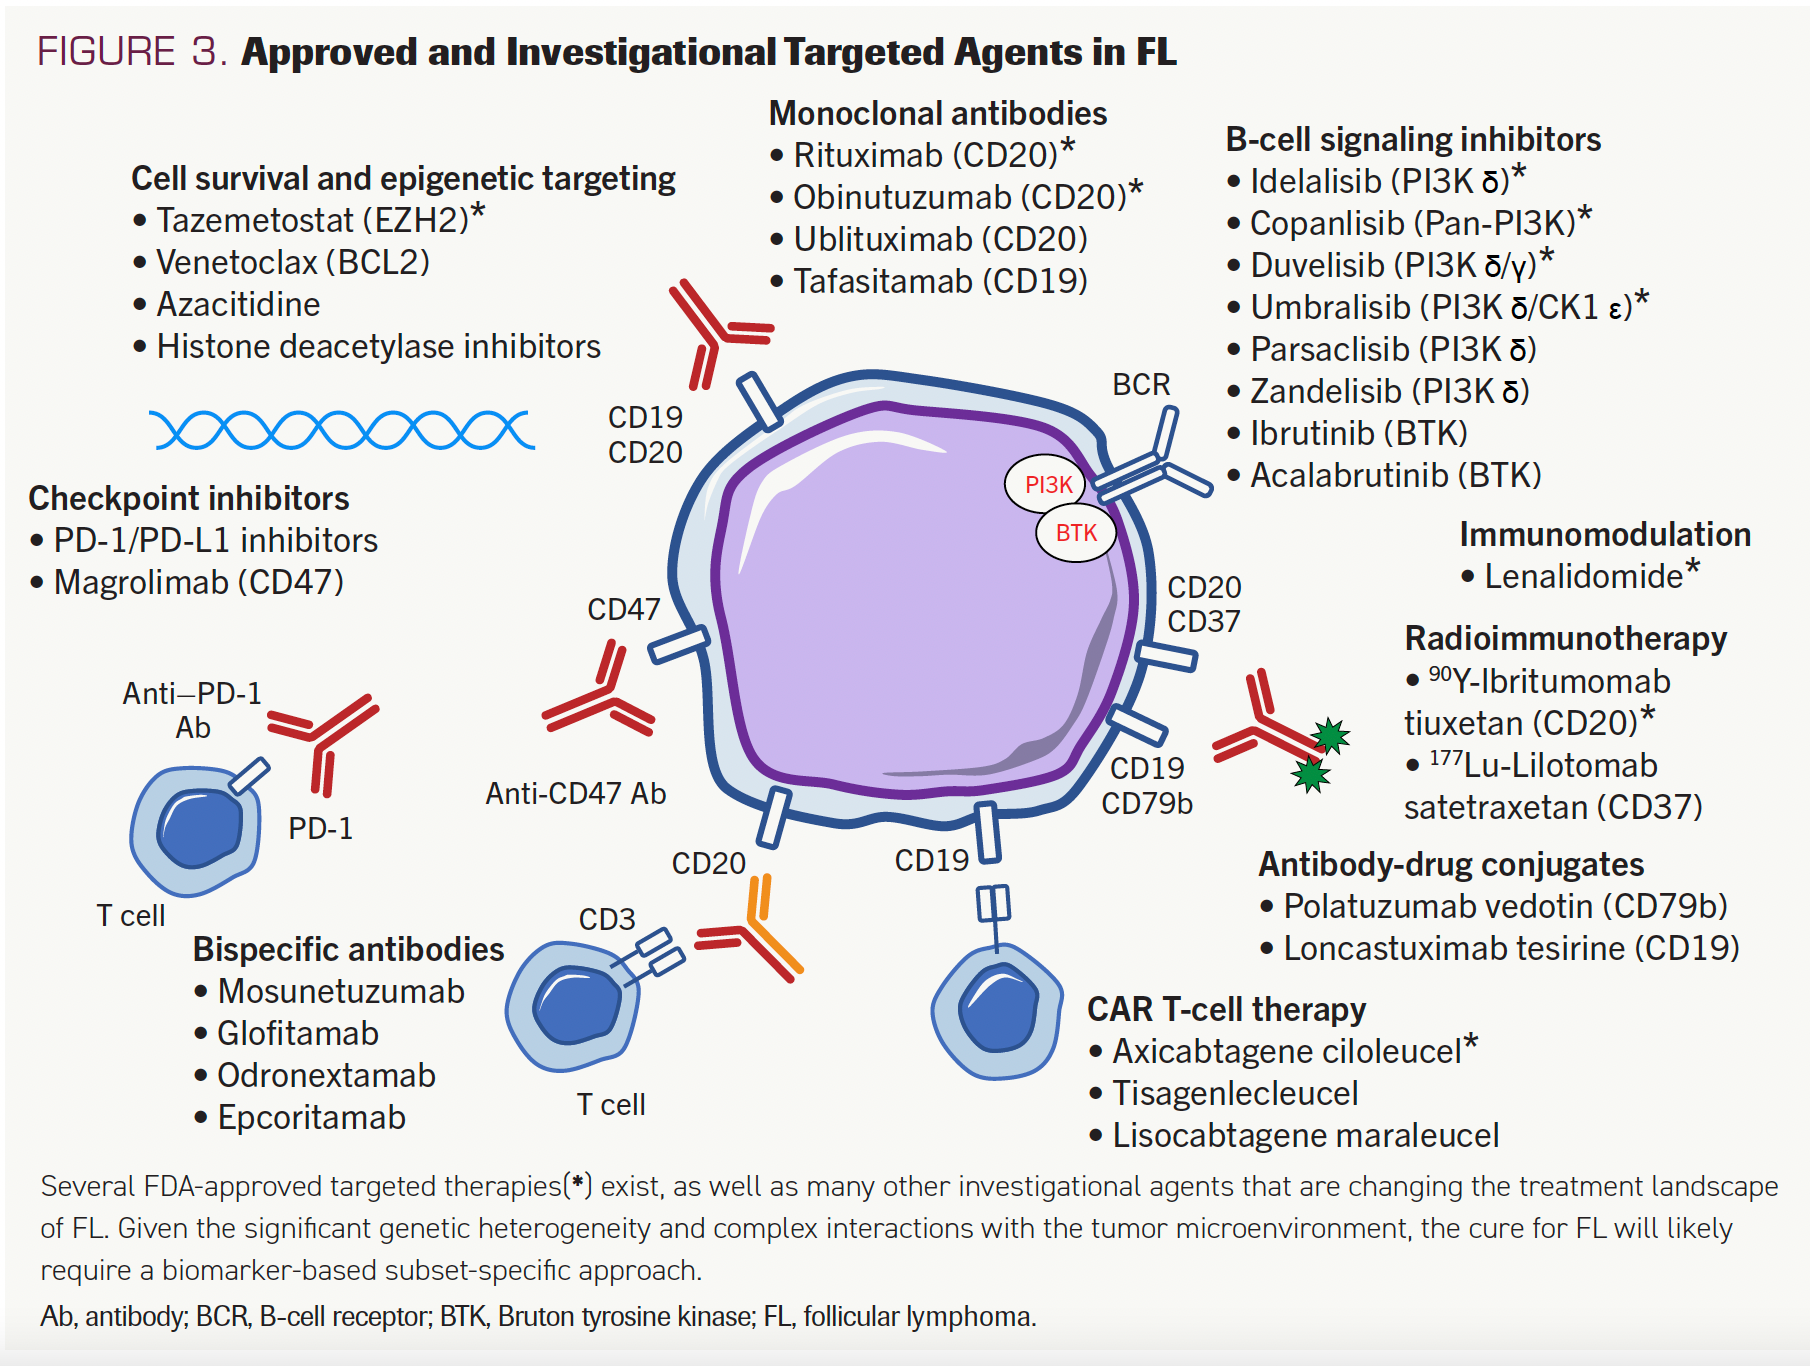 FIGURE 3. Approved and Investigational Targeted Agents in FL